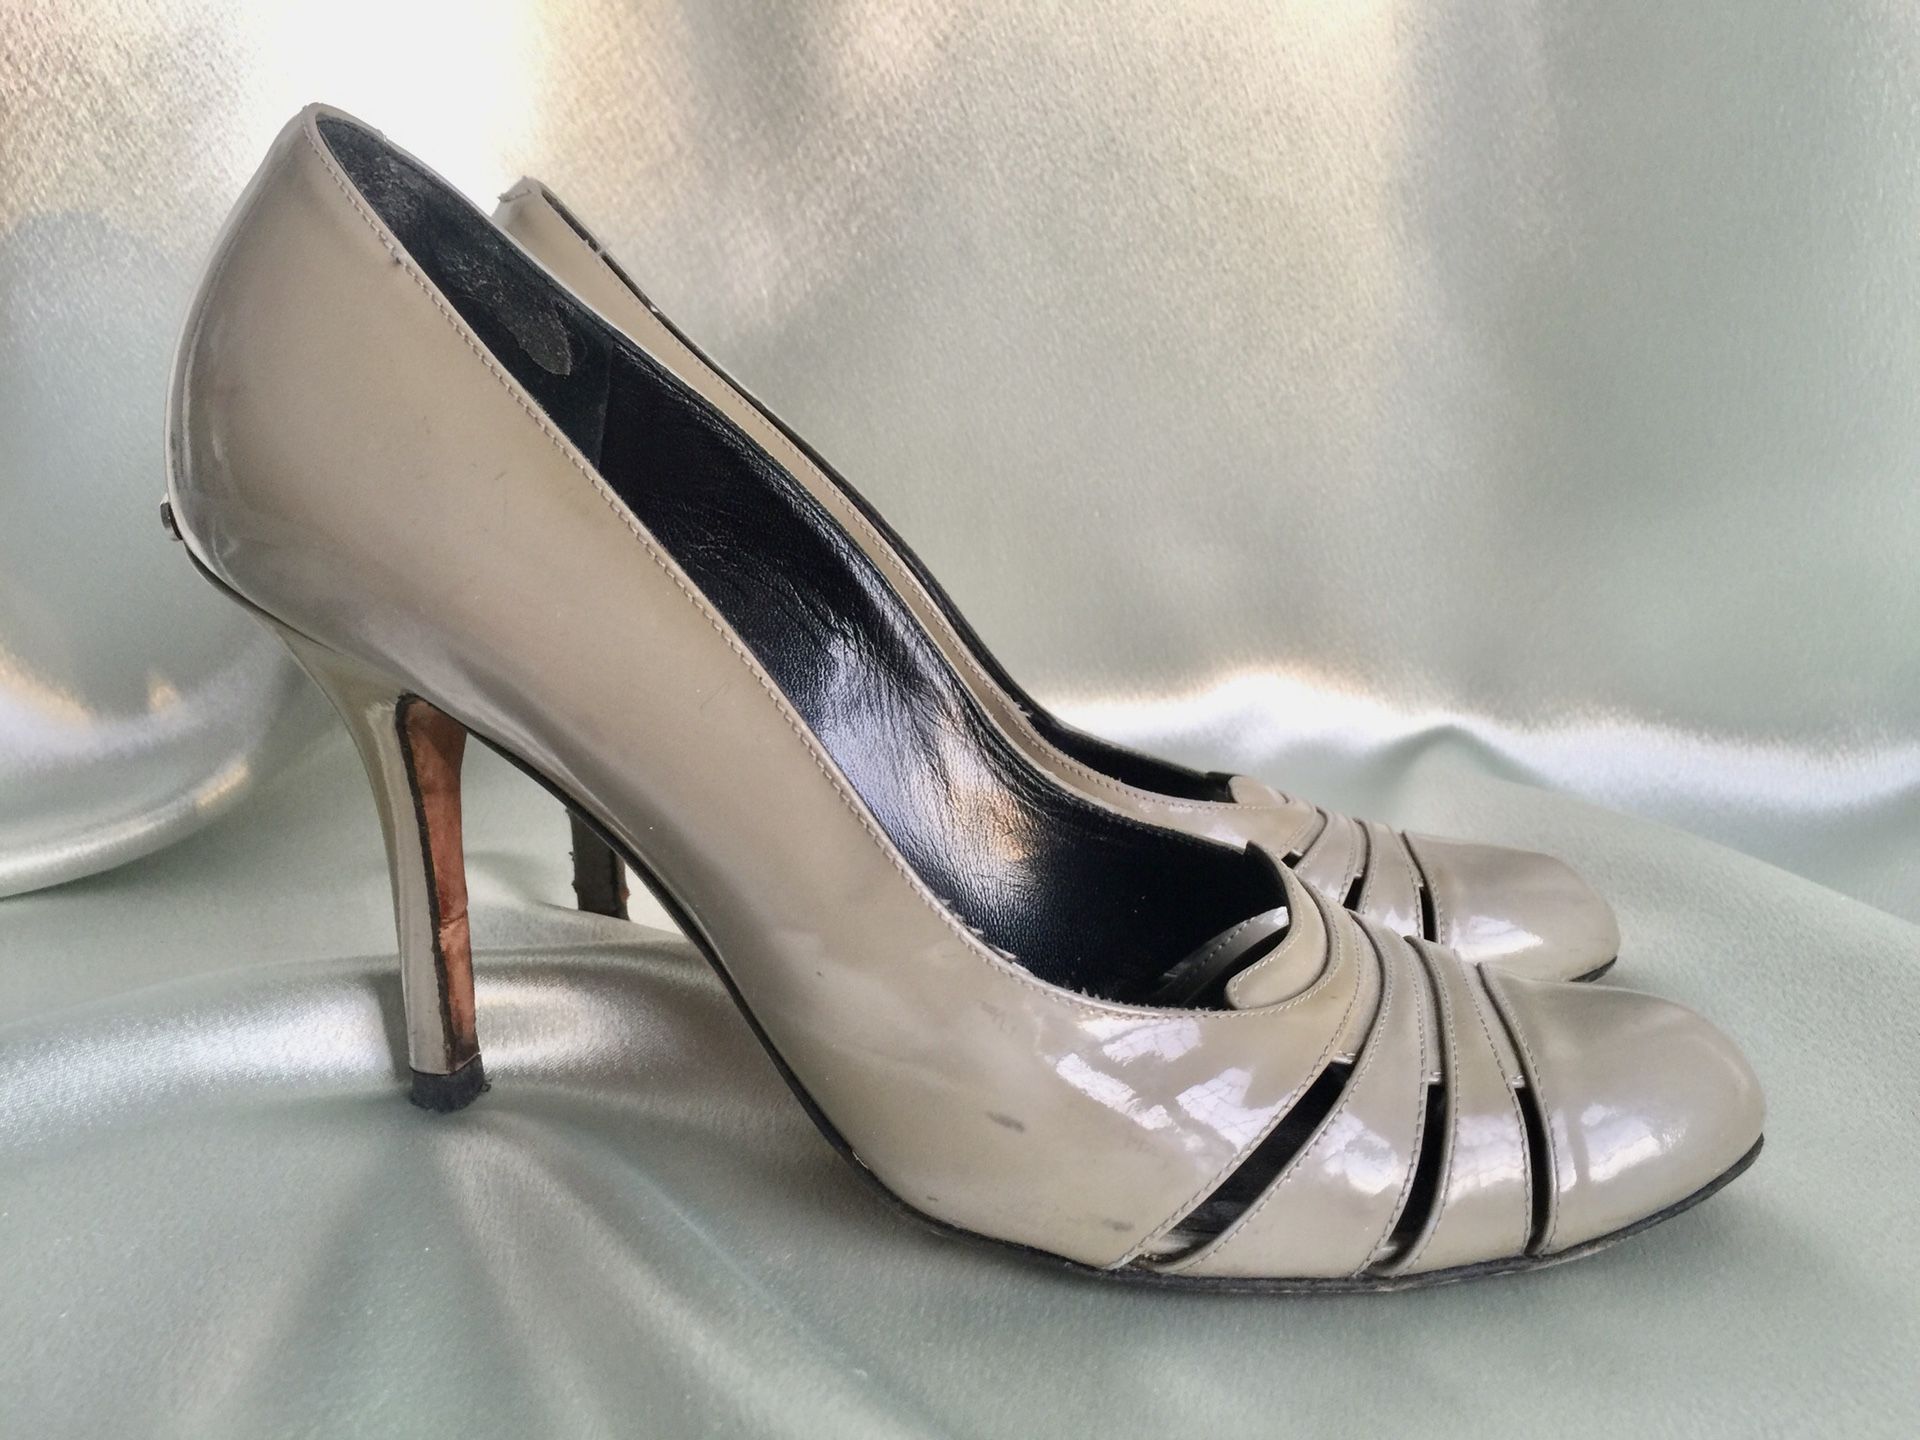 Christian Dior patent leather heels size 7, with DIOR plaques, round toe